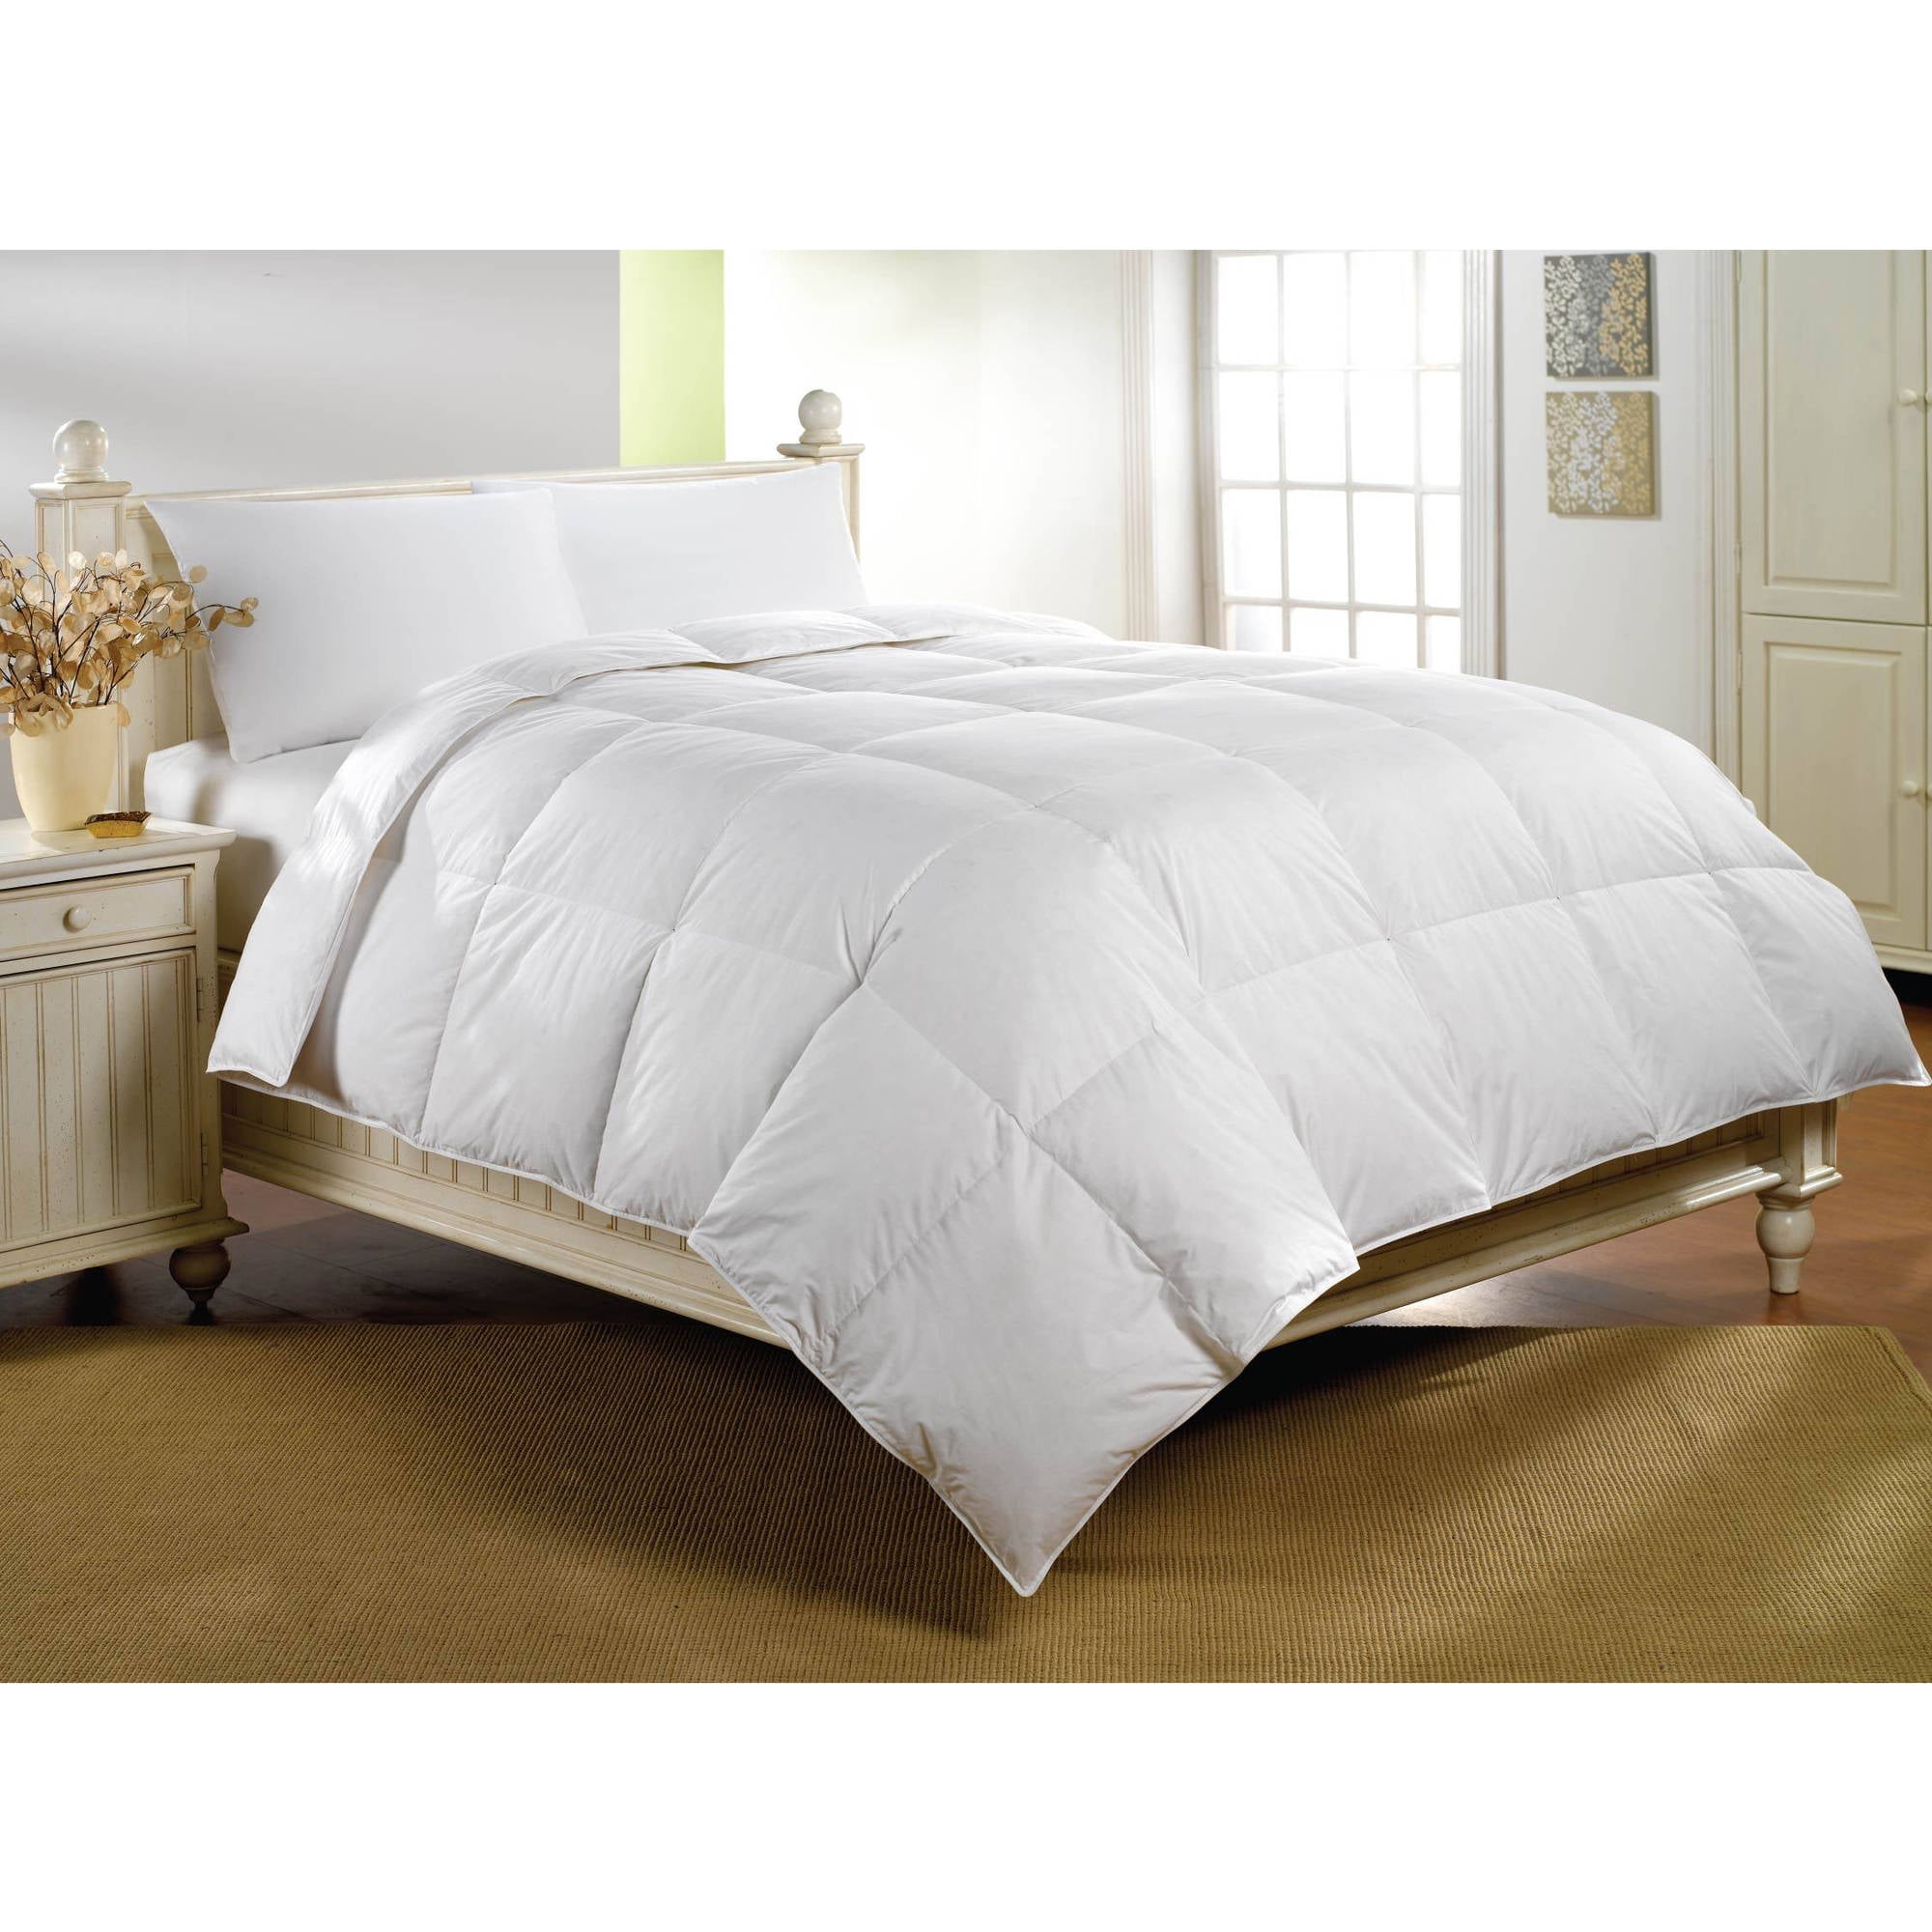 Queen Westex International 195406 Sleep Solutions Canadian White Down and Feather Comforter